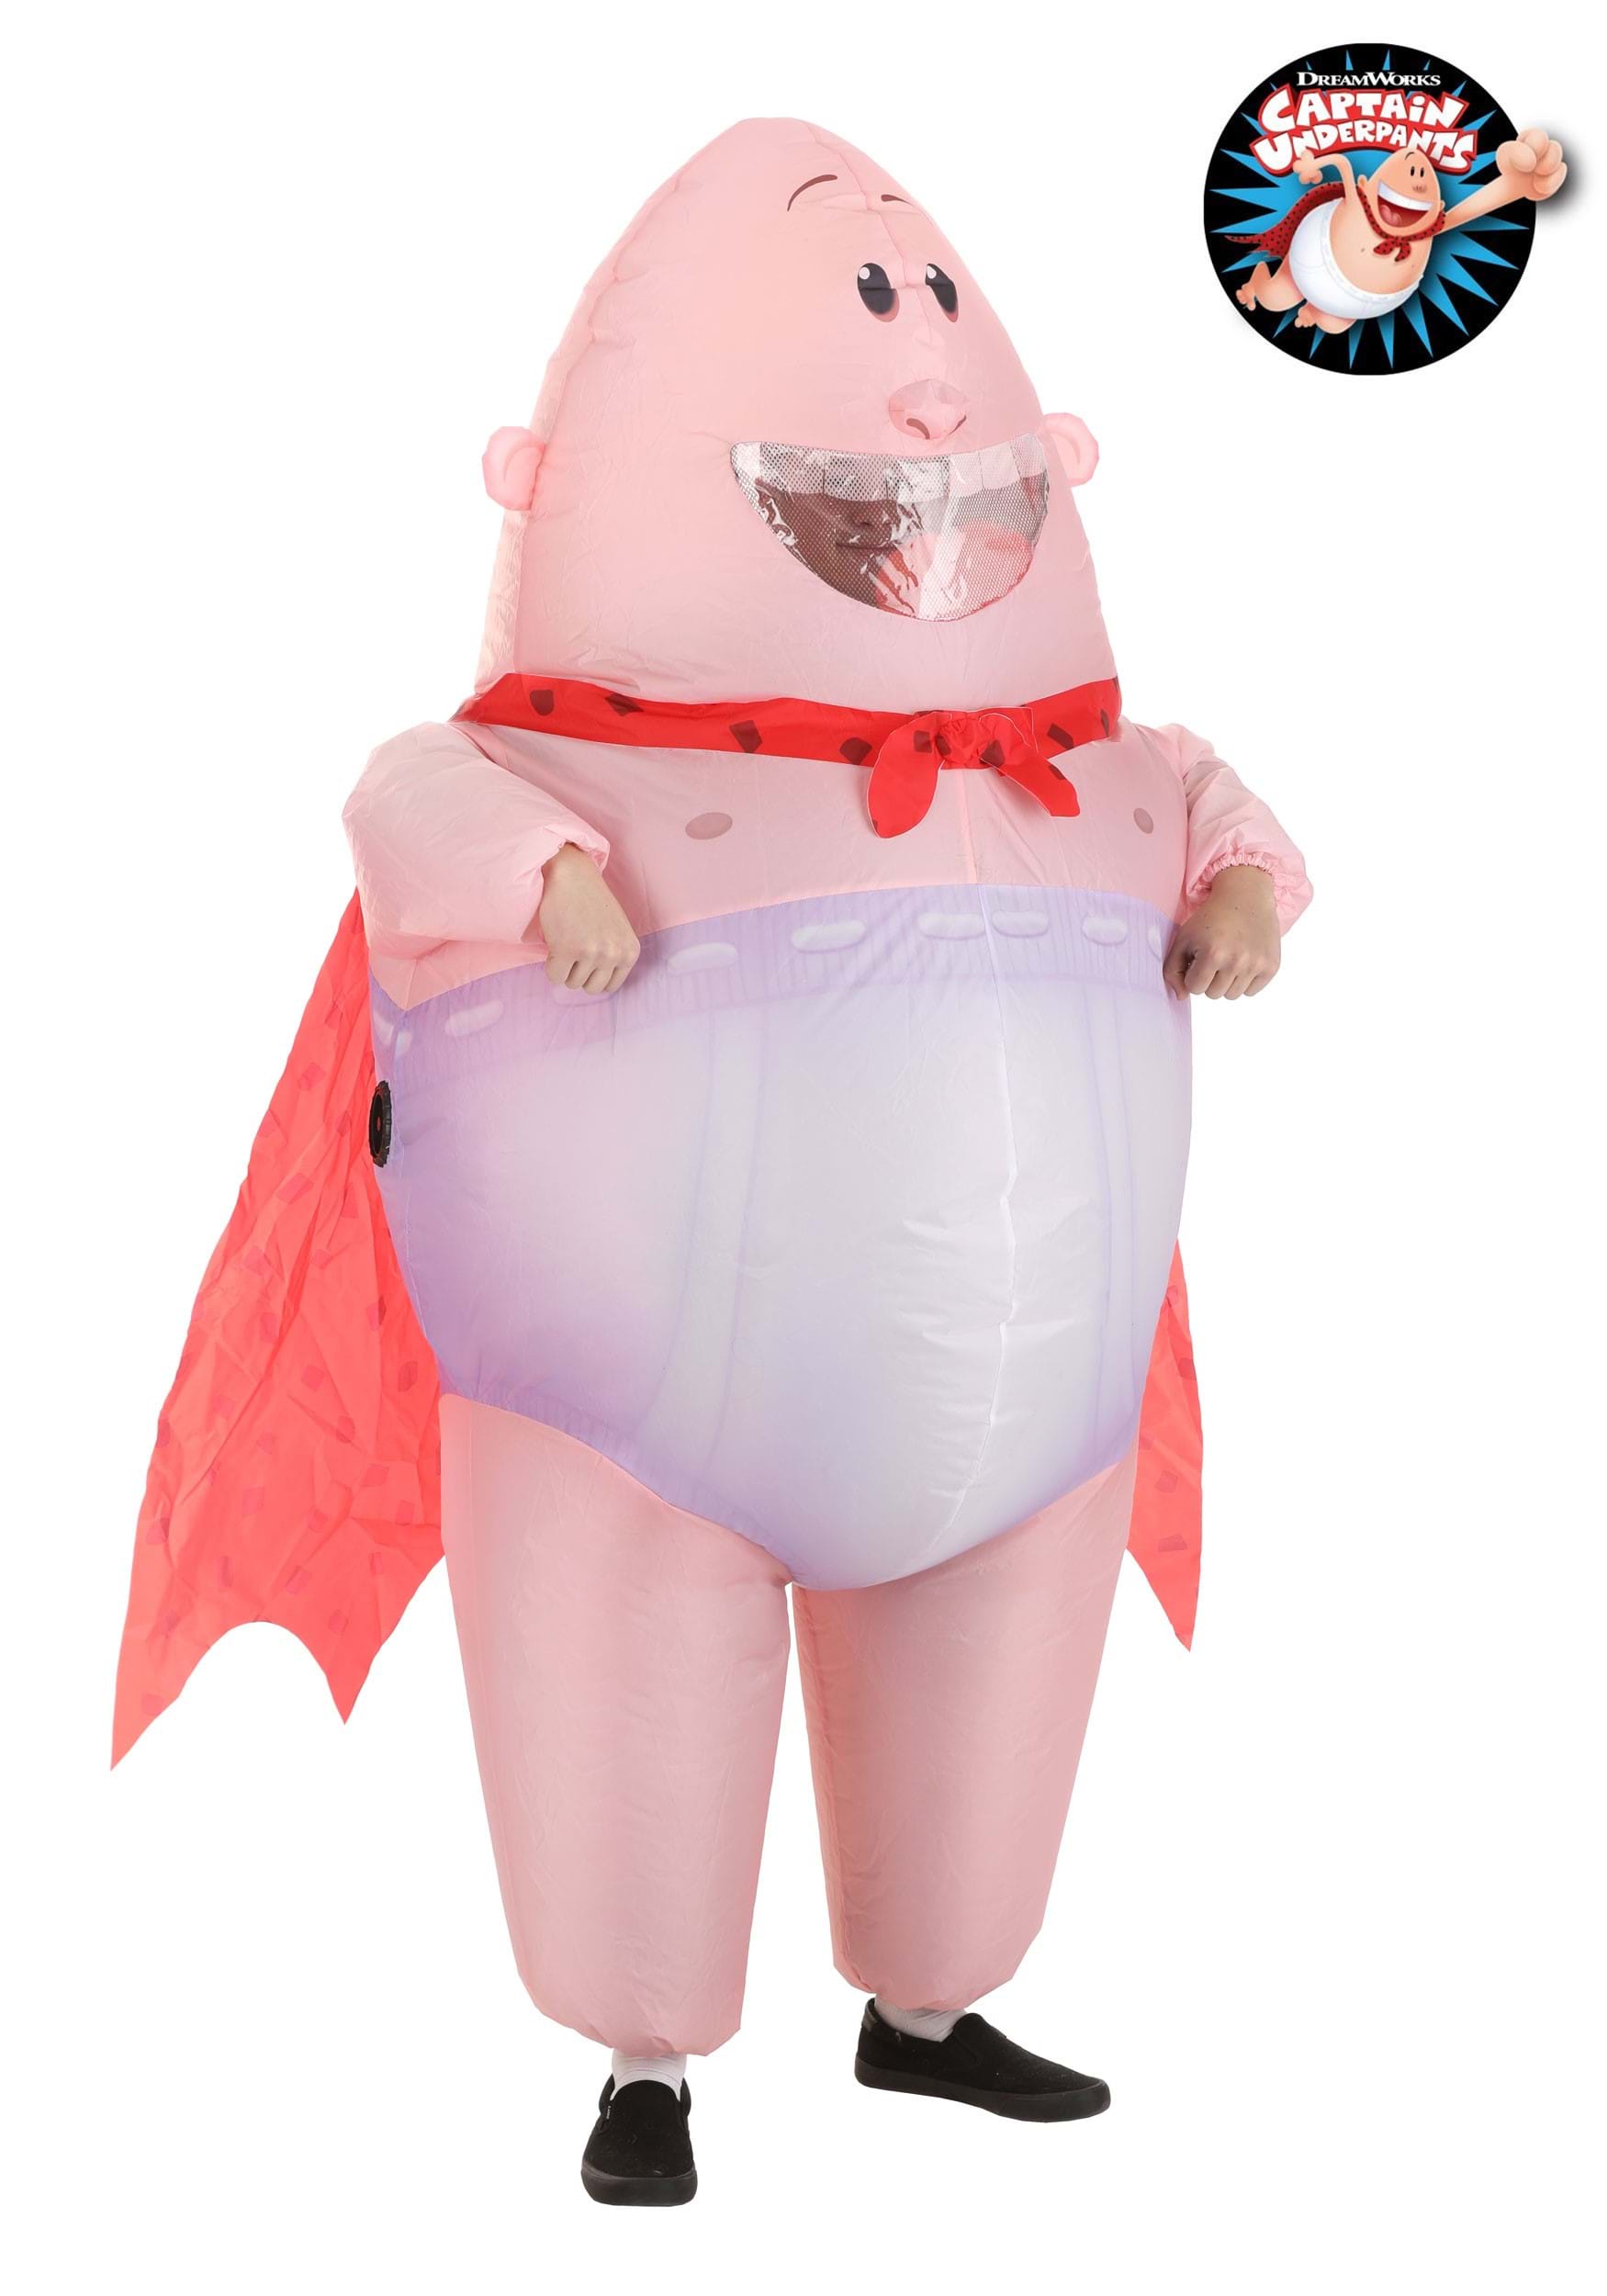 https://images.halloweencostumes.com/products/71000/1-1/adult-inflatable-captain-underpants-costume.jpg